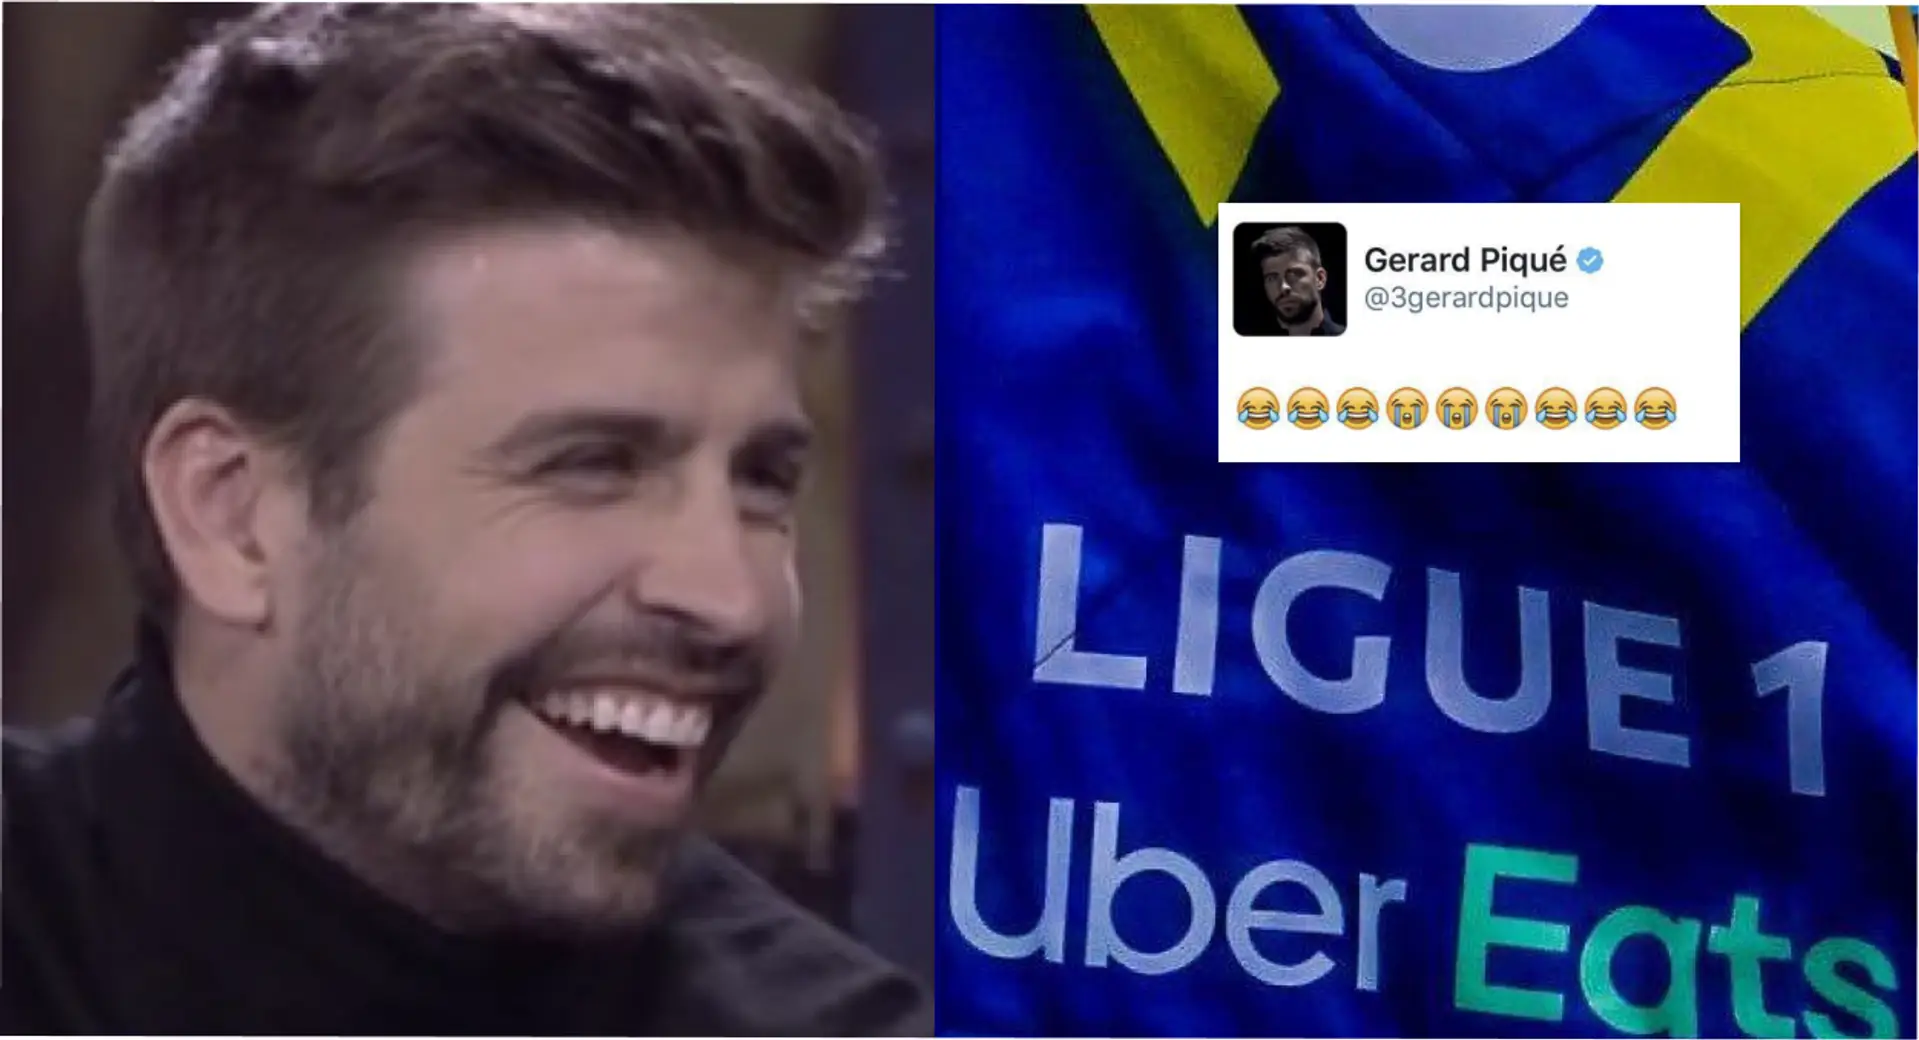 Ligue 1 tries to mock Gerard Pique on Twitter – gets humbled immediately 